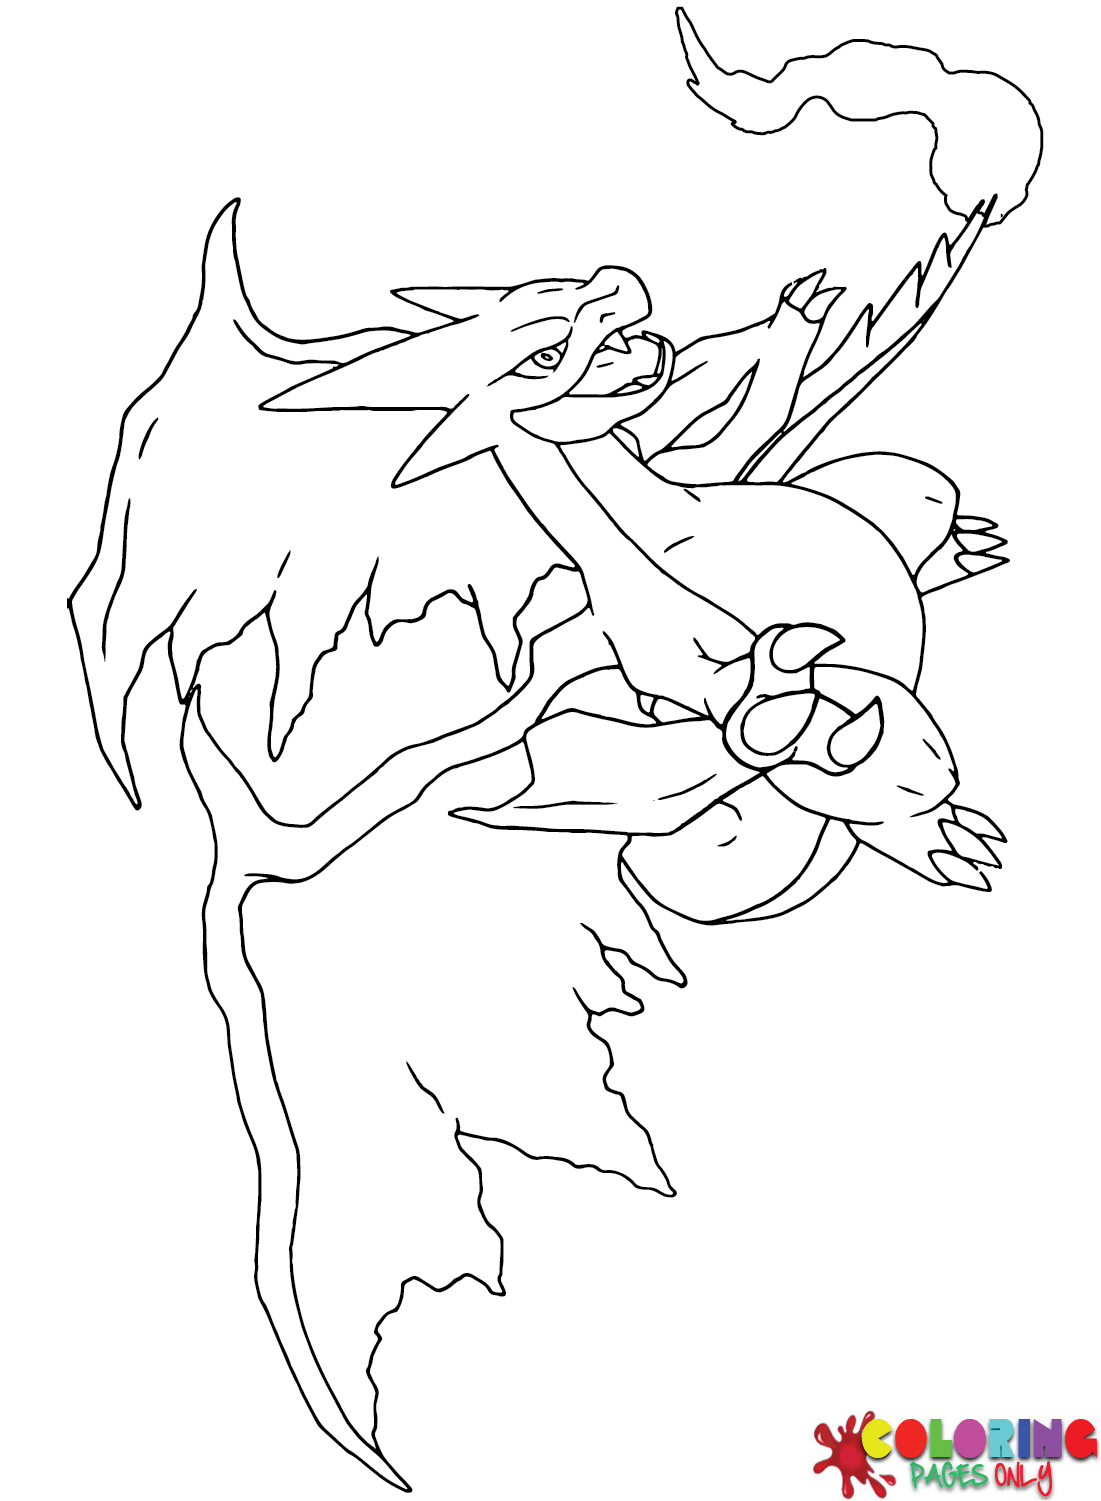 The Charizard Pokemon Coloring Pages